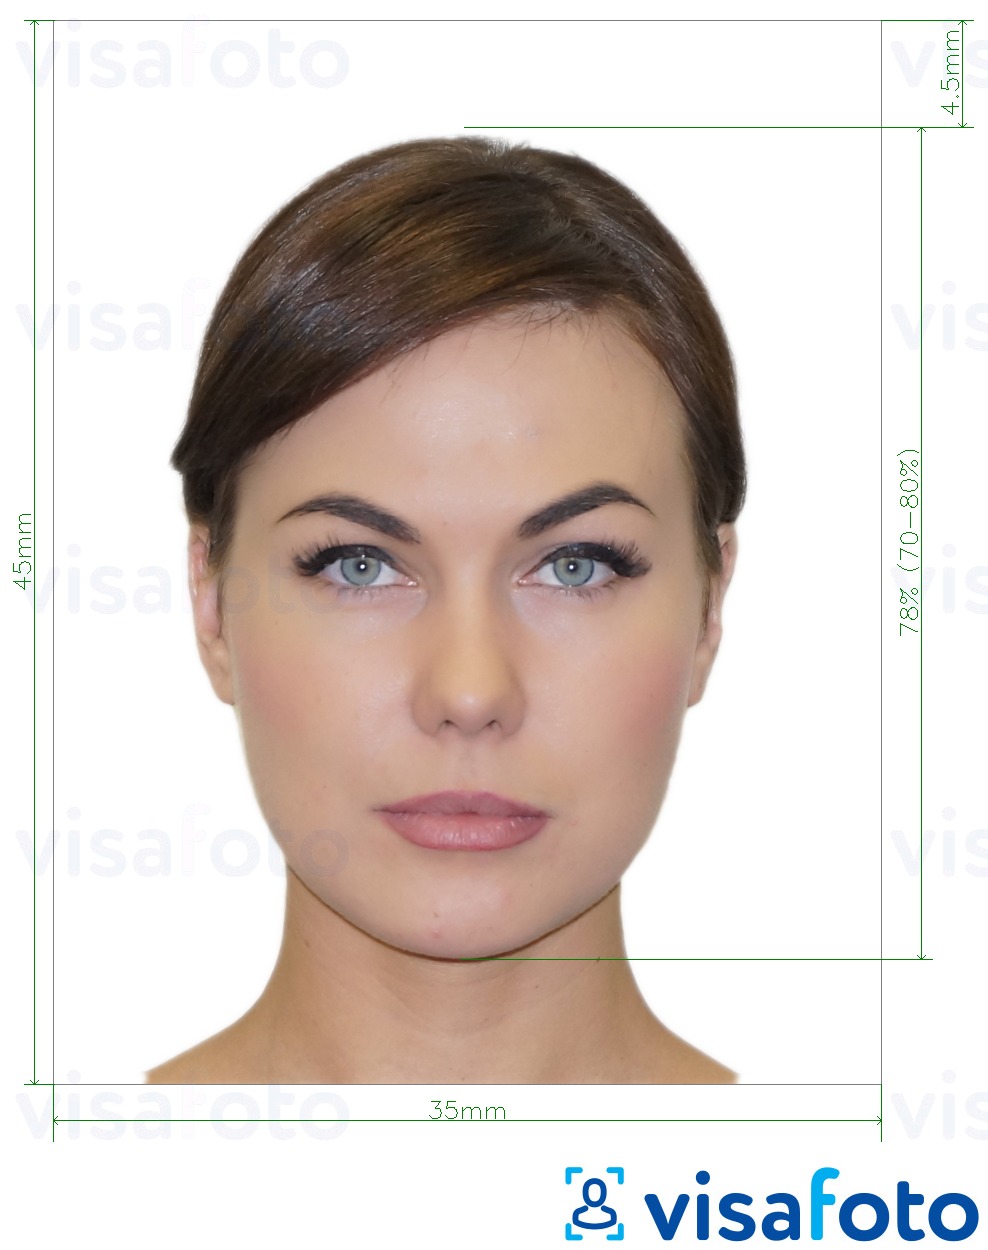 Example of photo for Russia Internal Passport, 35x45 mm (3.5x4.5 cm) with exact size specification